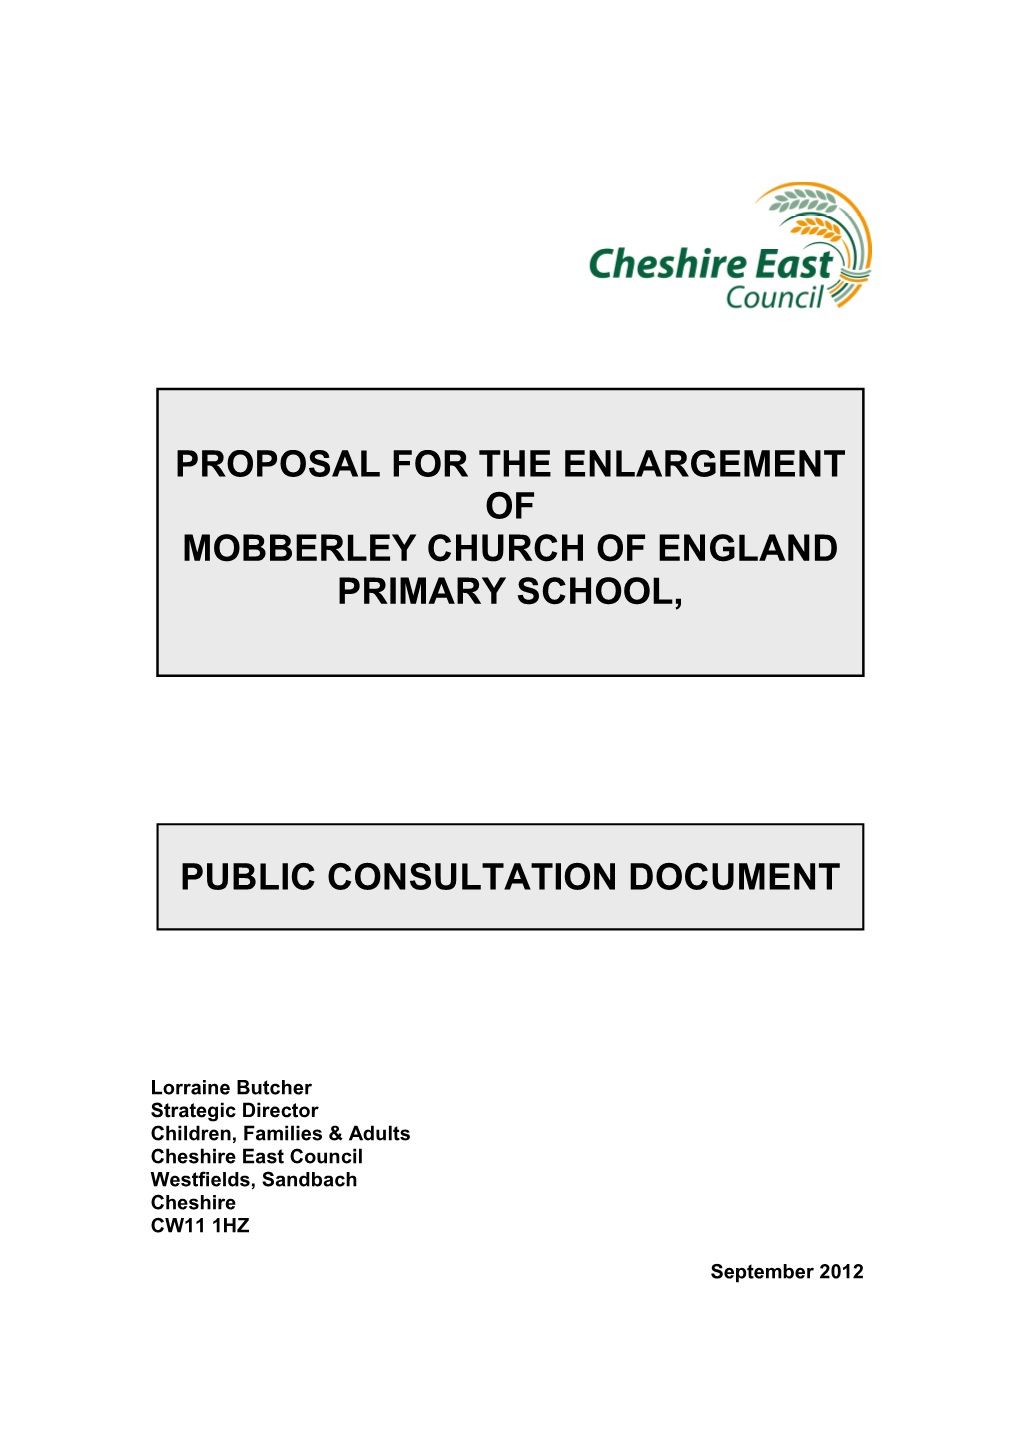 Public Consultation Document Proposal for the Enlargement of Mobberley Church of England Primary School